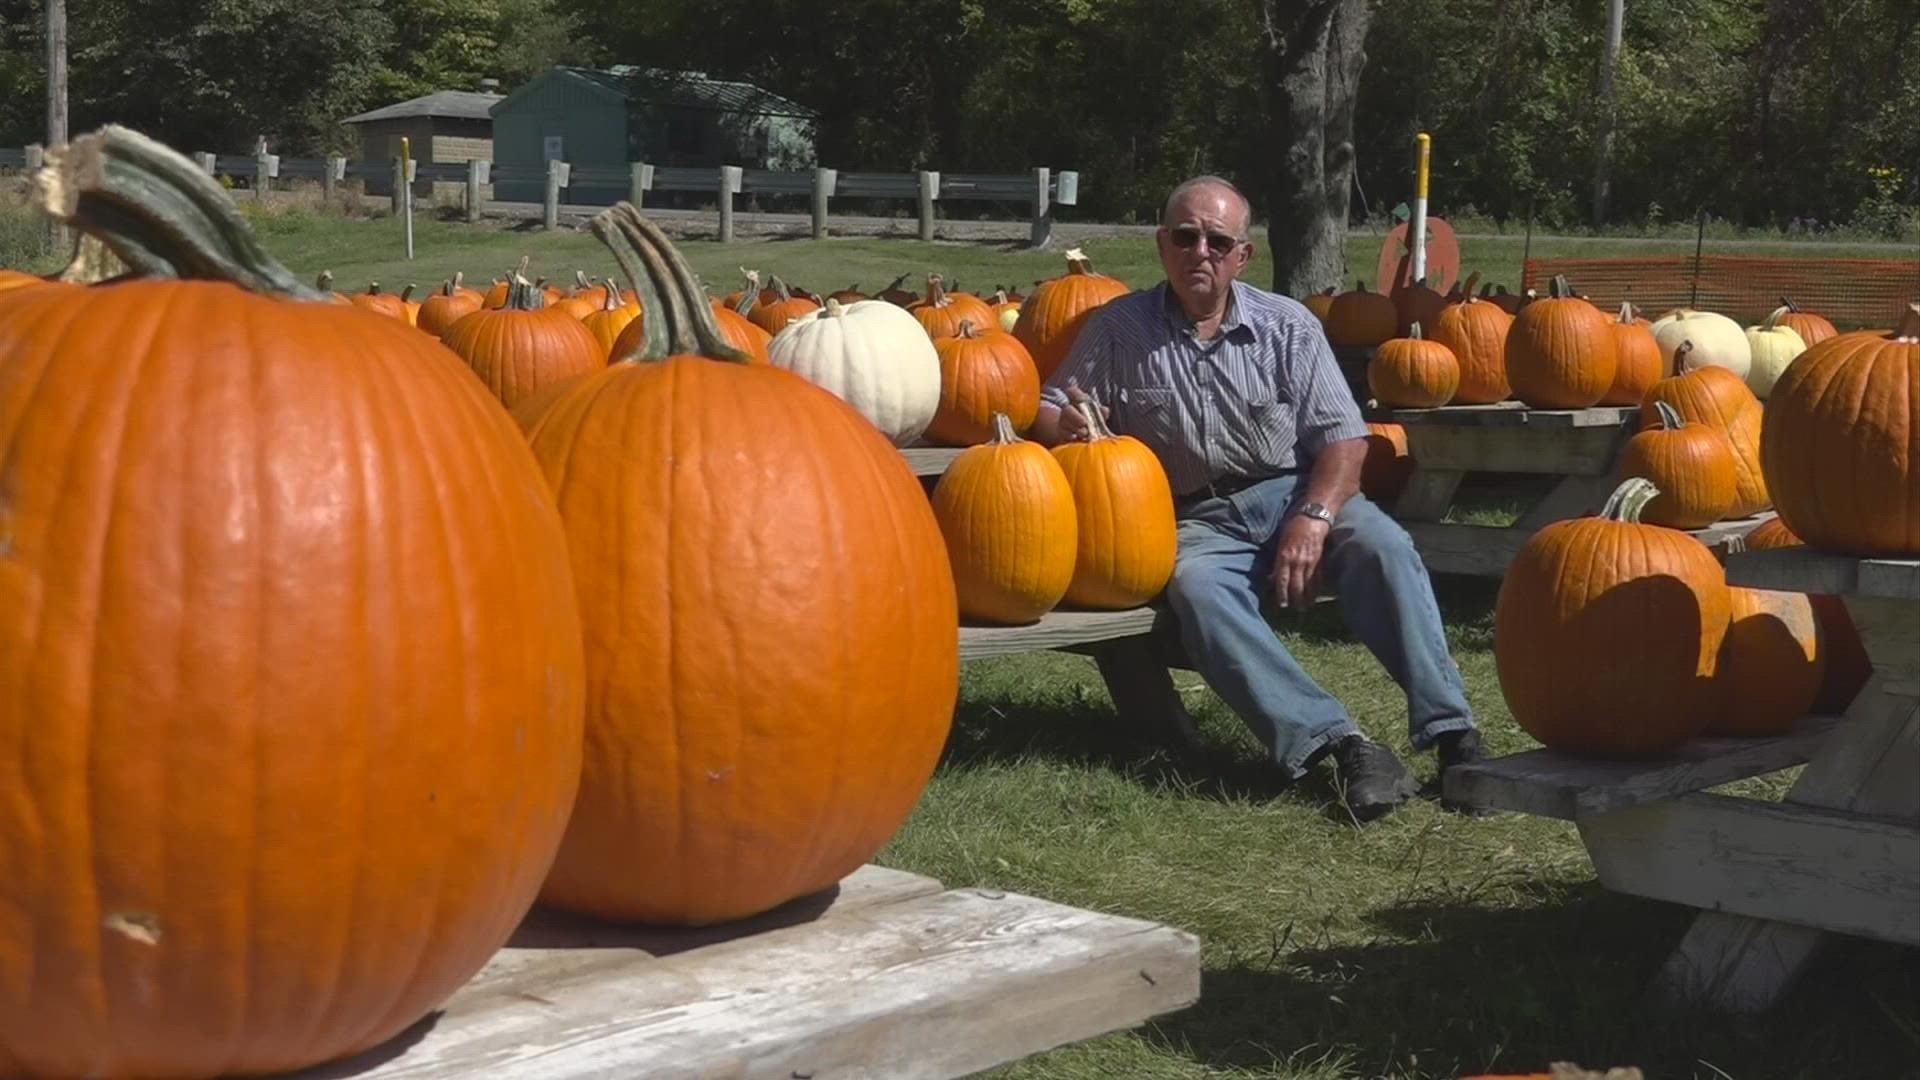 Have you ever noticed how people are so particular when it comes to picking pumpkins? The same could be said for picking friends.